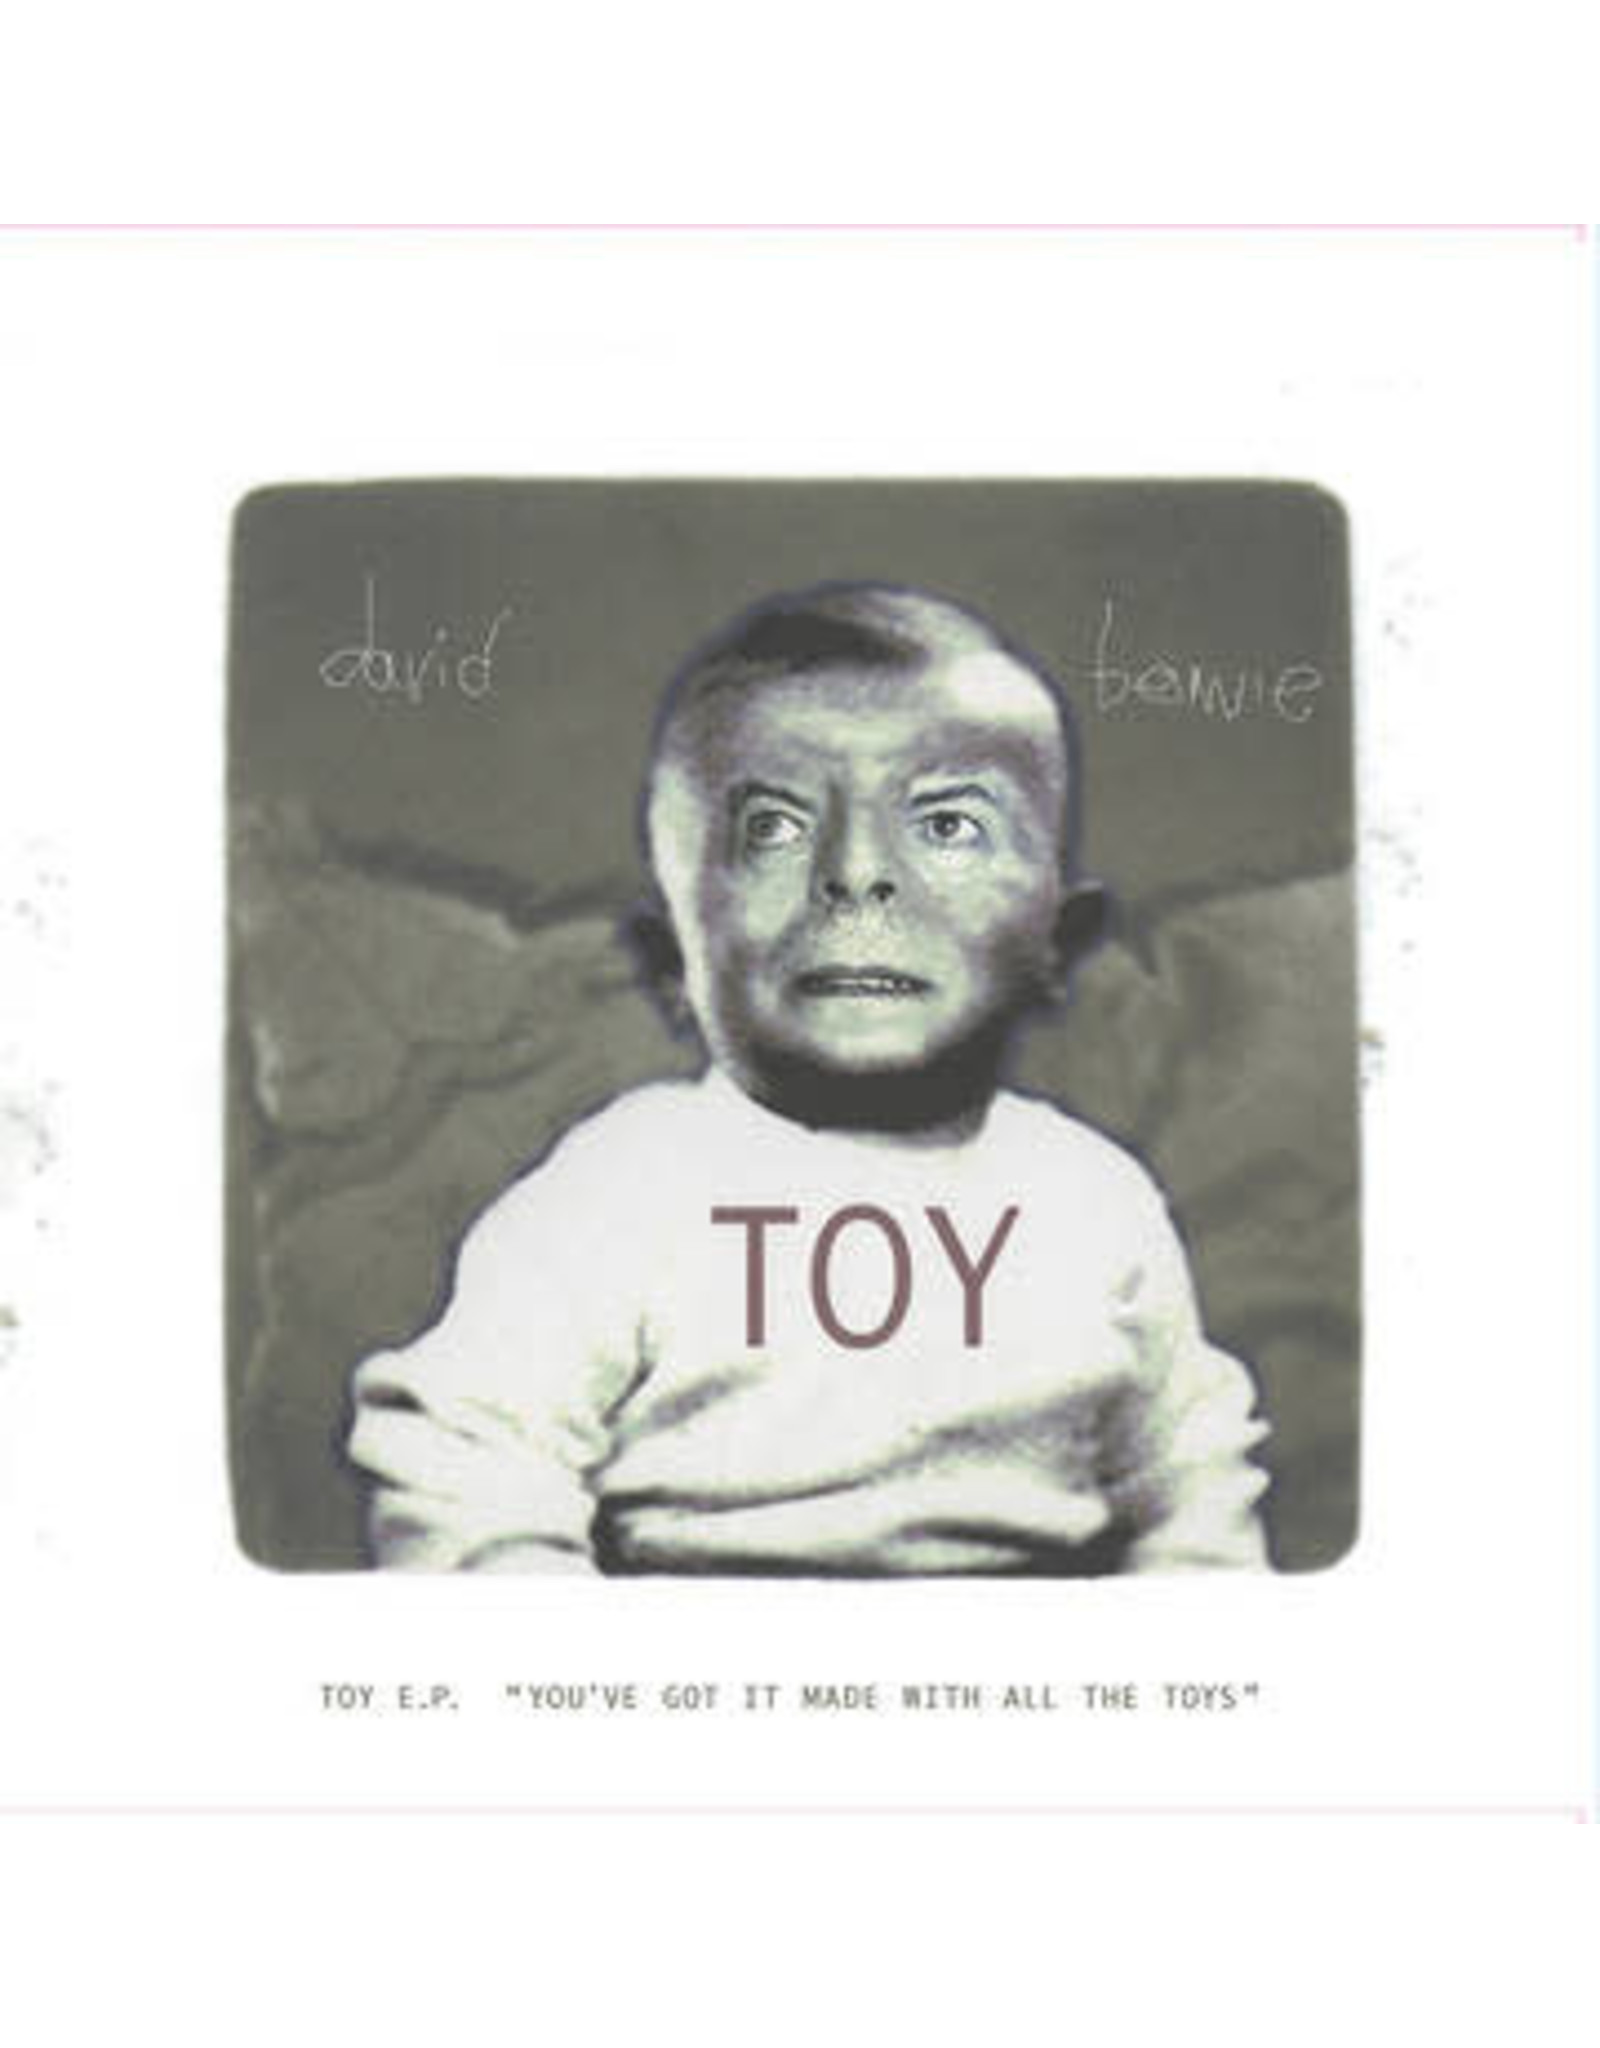 Bowie, David - Toy EP CD